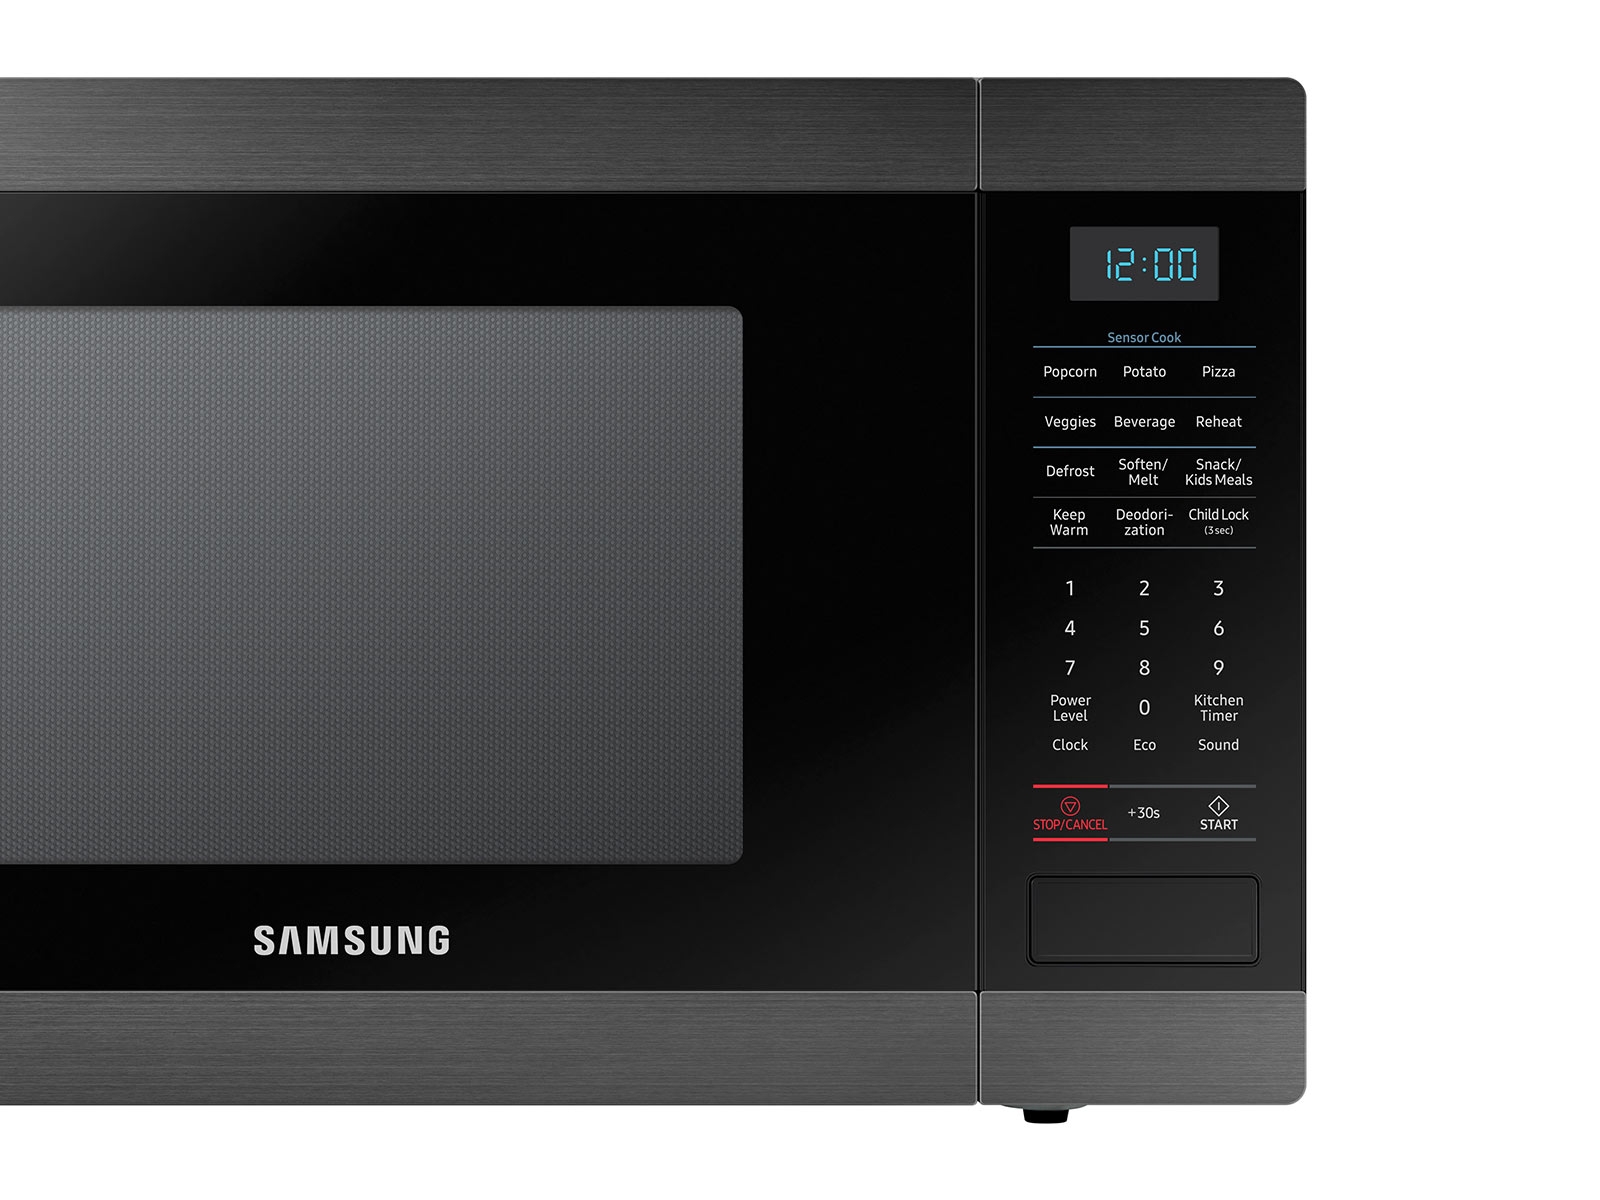 https://image-us.samsung.com/SamsungUS/home/home-appliances/microwaves/countertop/pdp/ms19m8000ag/gallery/020718/04_Microwave_MS19M8000AG_Control_Panel_Black.jpg?$product-details-jpg$